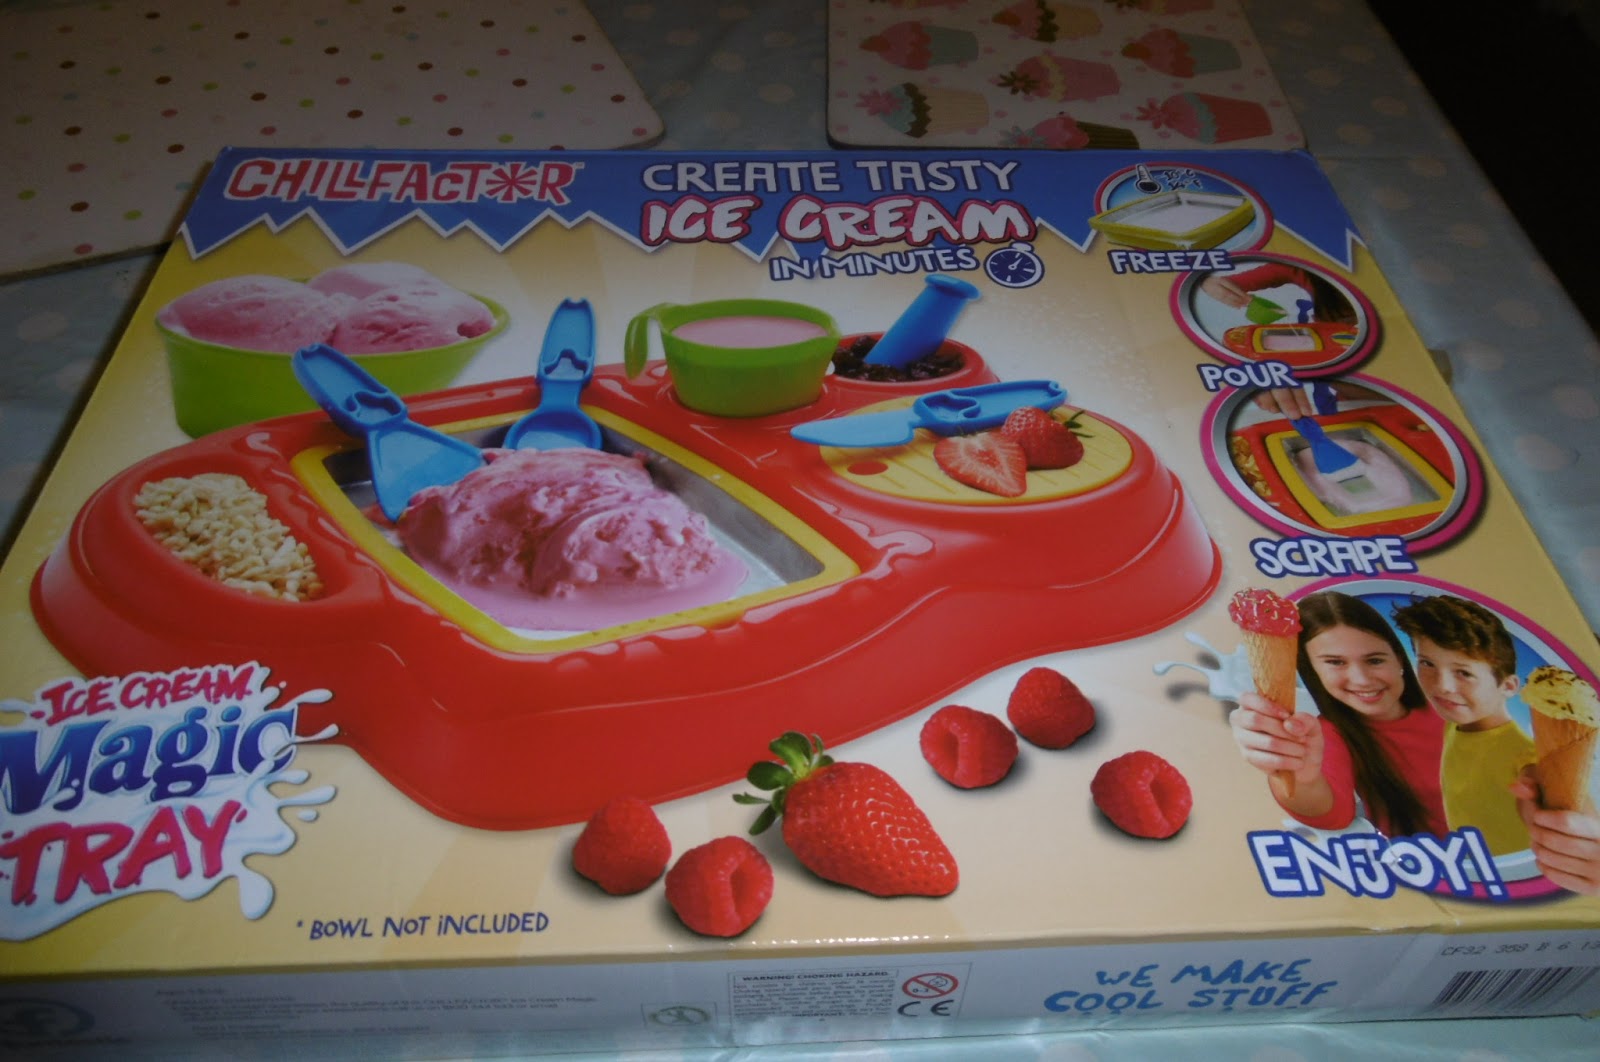 Madhouse Family Reviews ChillFactor Ice Cream Magic Tray Review